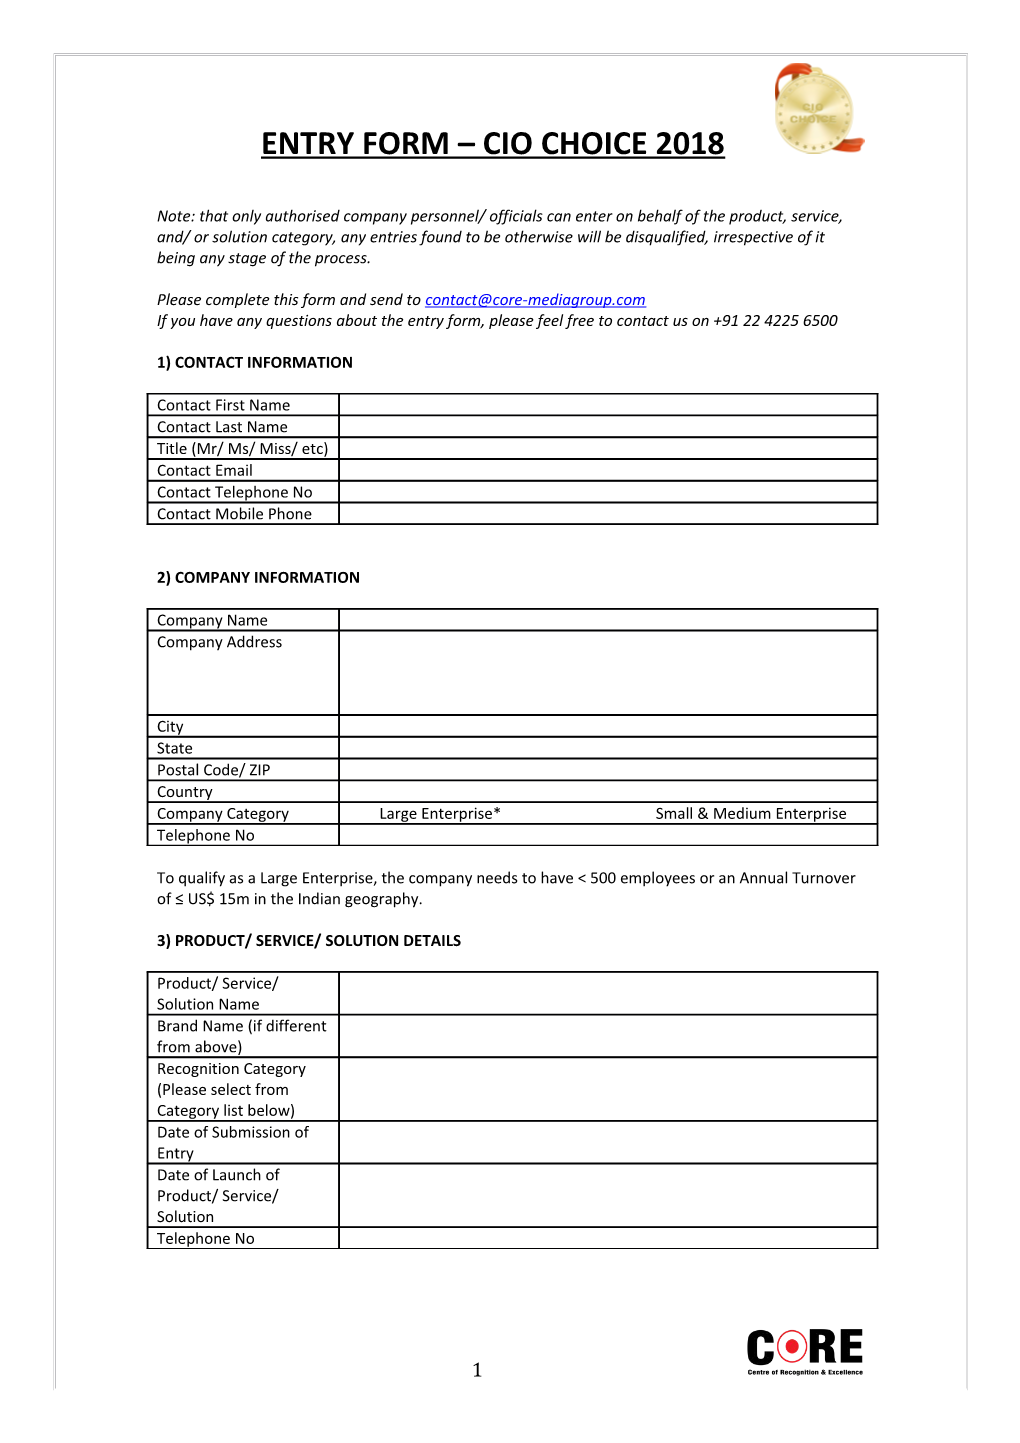 Please Complete This Form and Send To